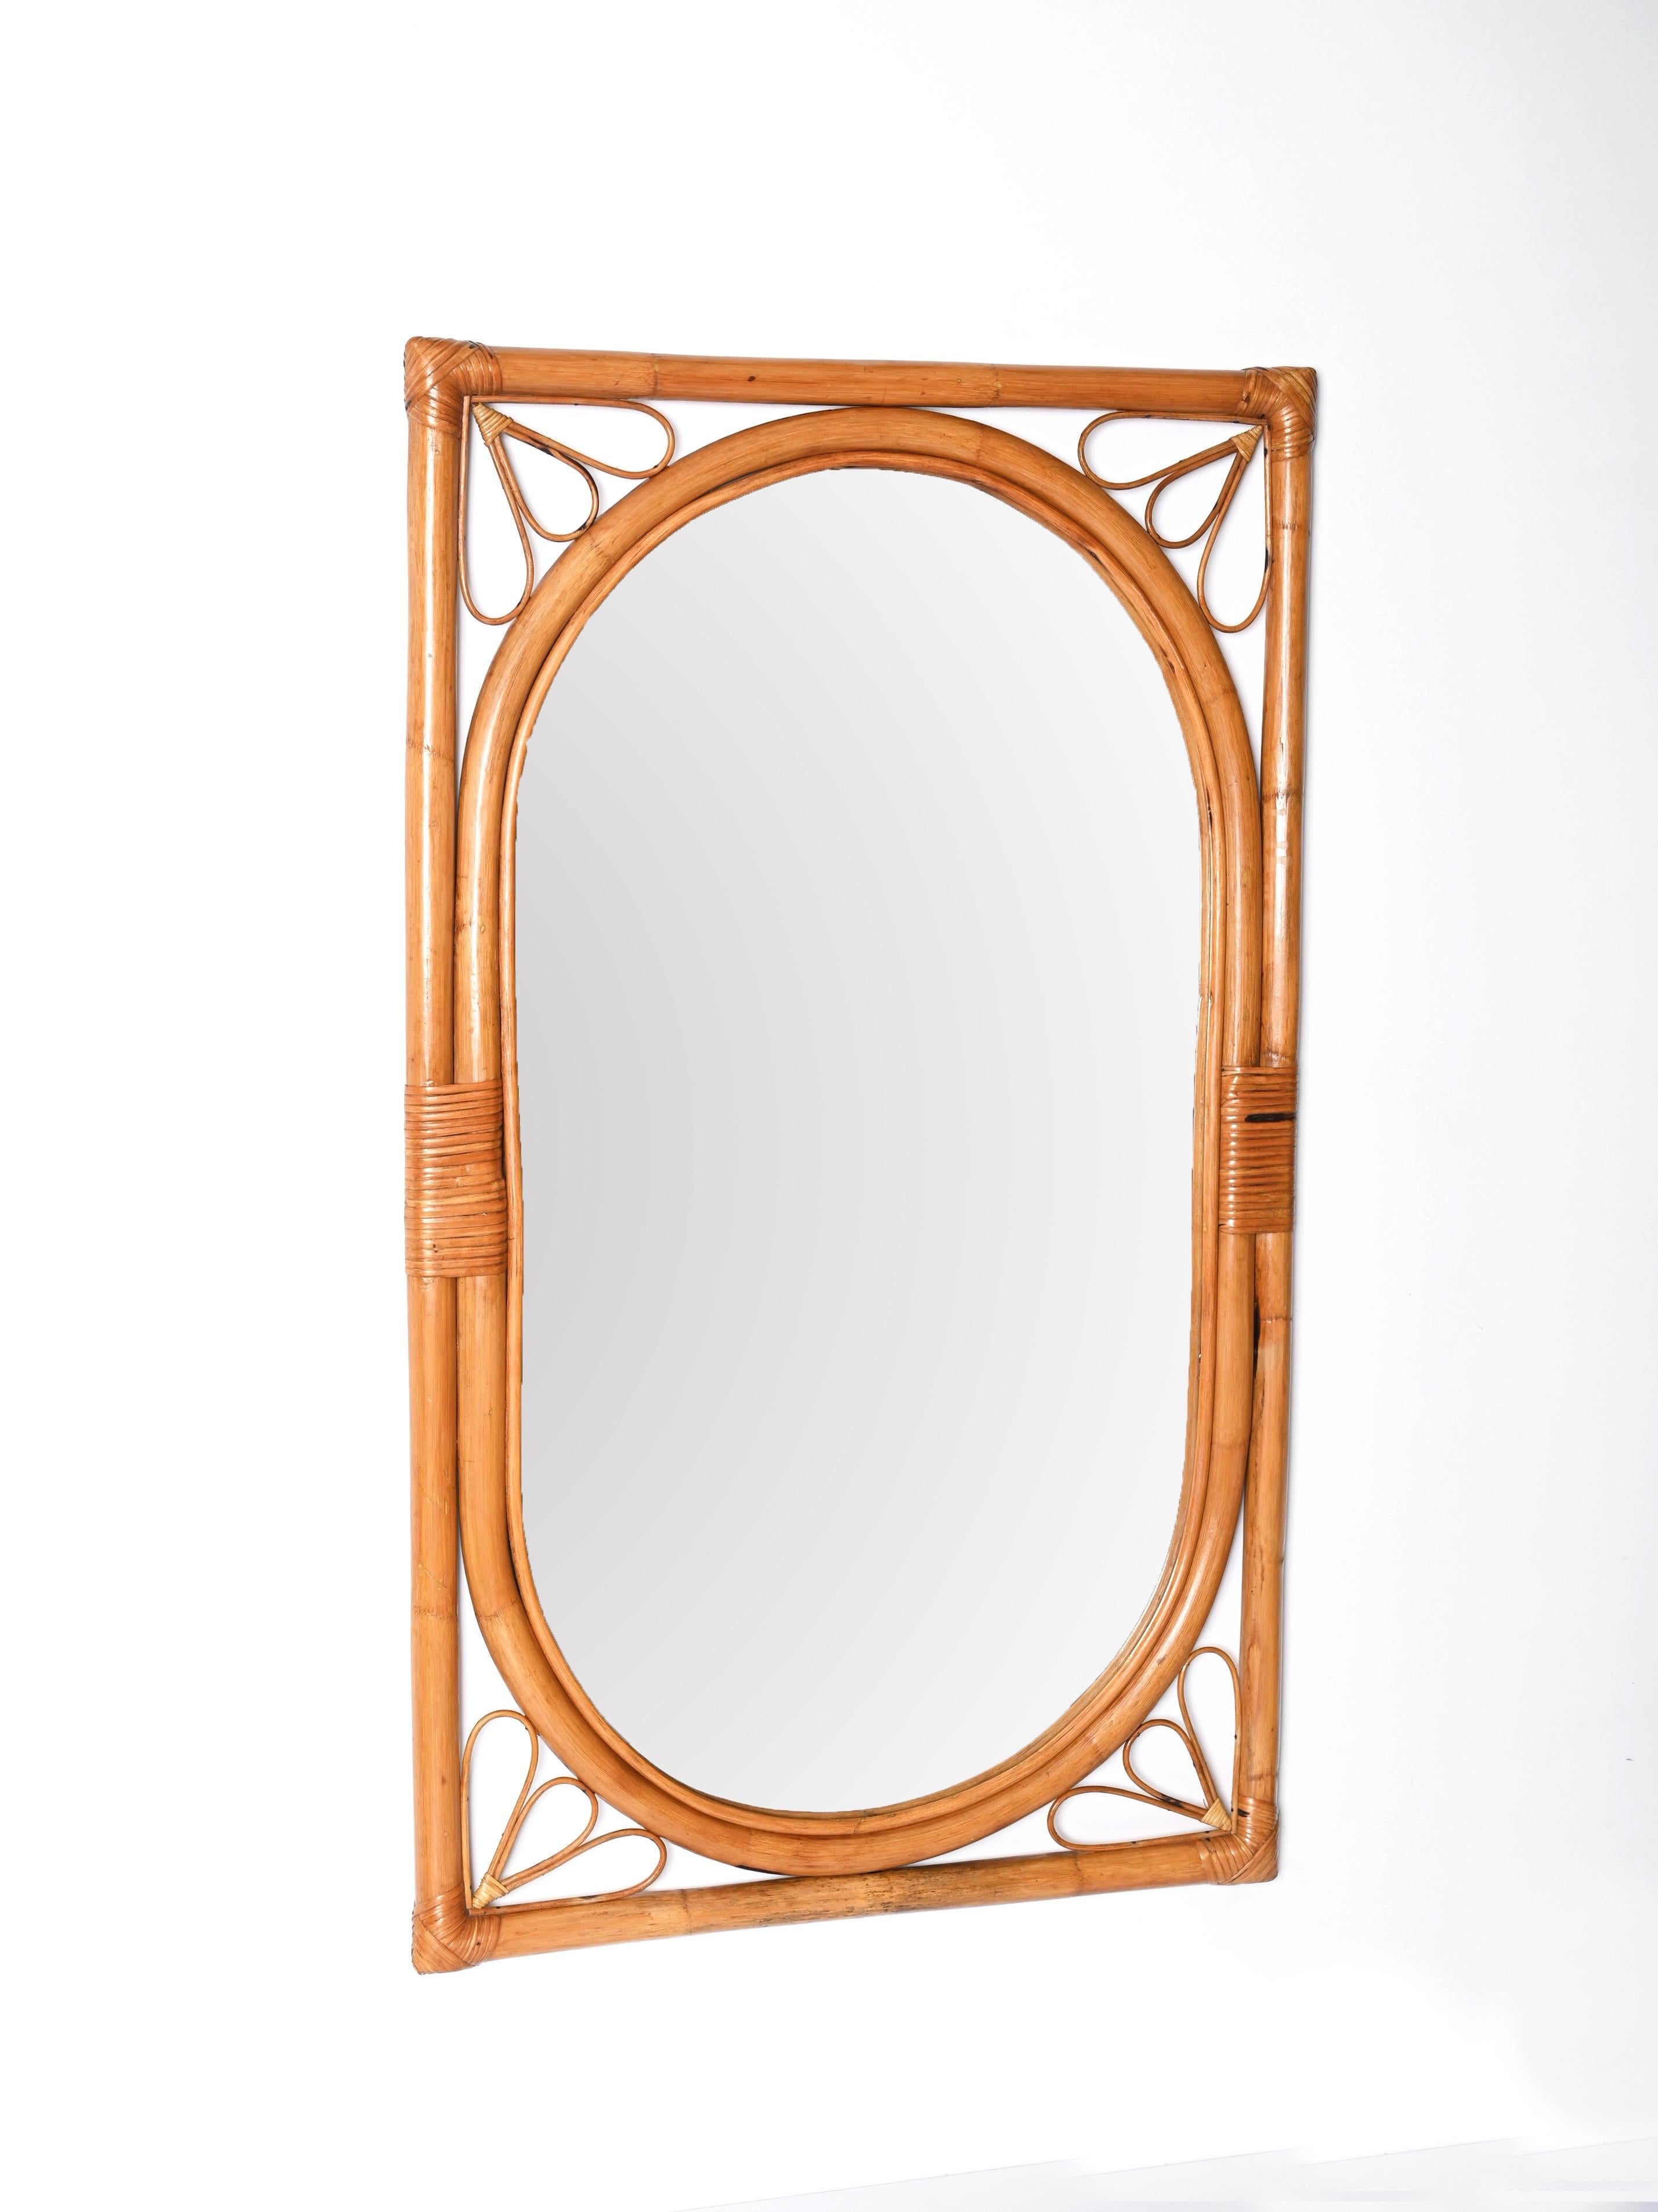 Mid-Century Modern Midcentury Italian Mirror with Double Frame in Bamboo and Rattan, 1970s